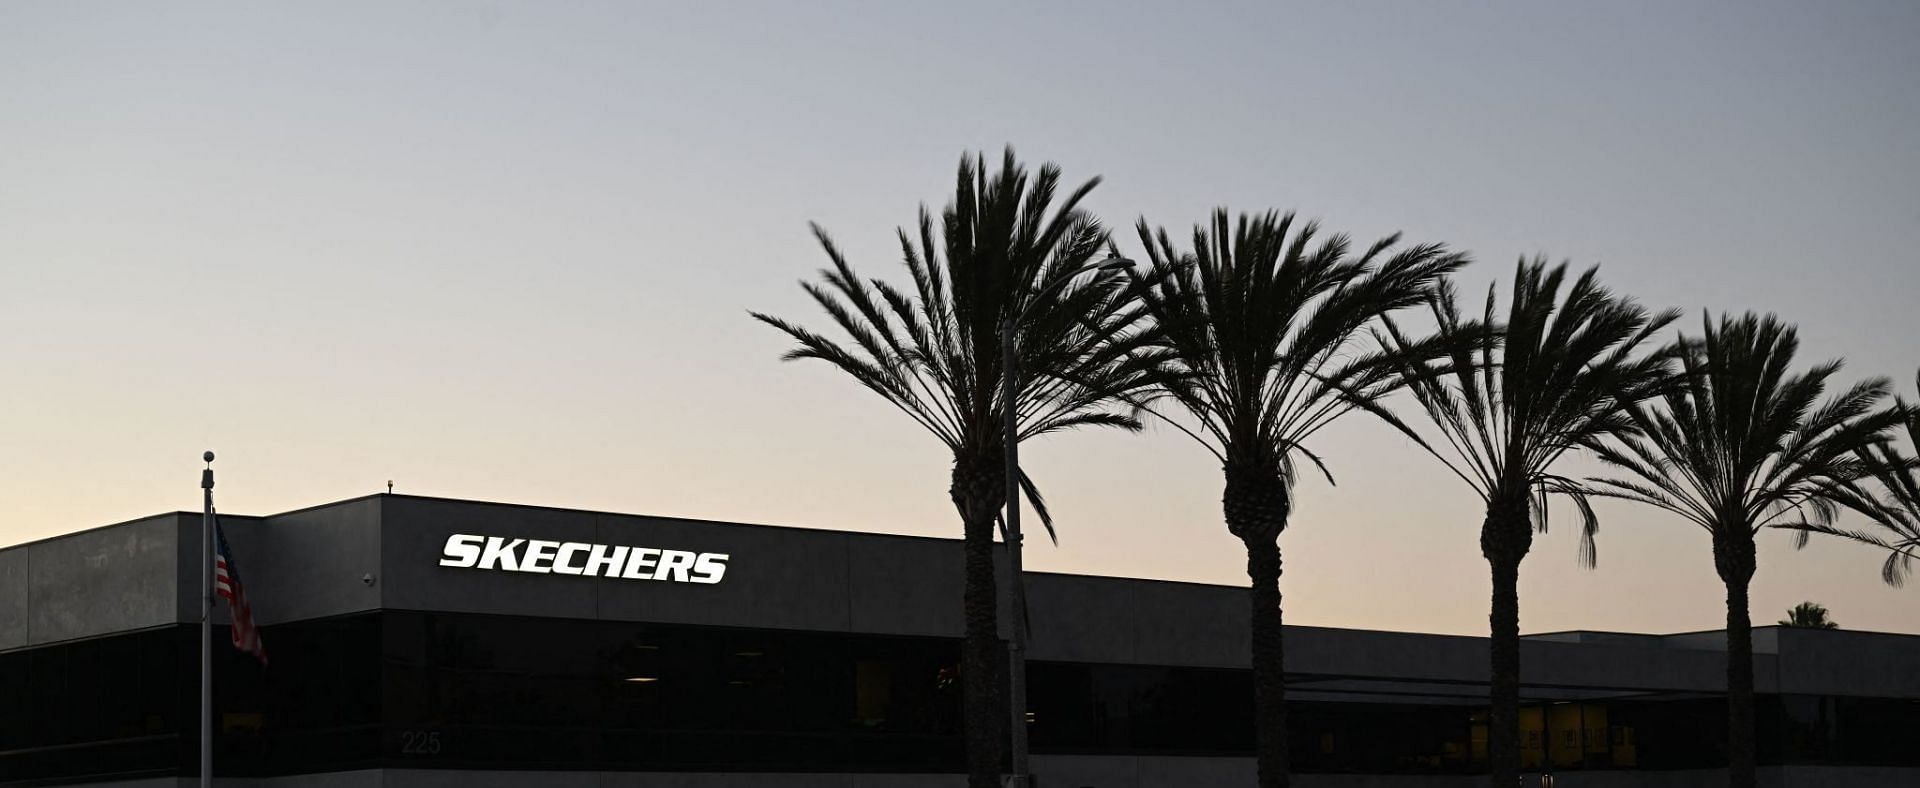 Skechers is owned and operated by the Greenberg family and founded by Robert Greenberg (Image via Getty Images)